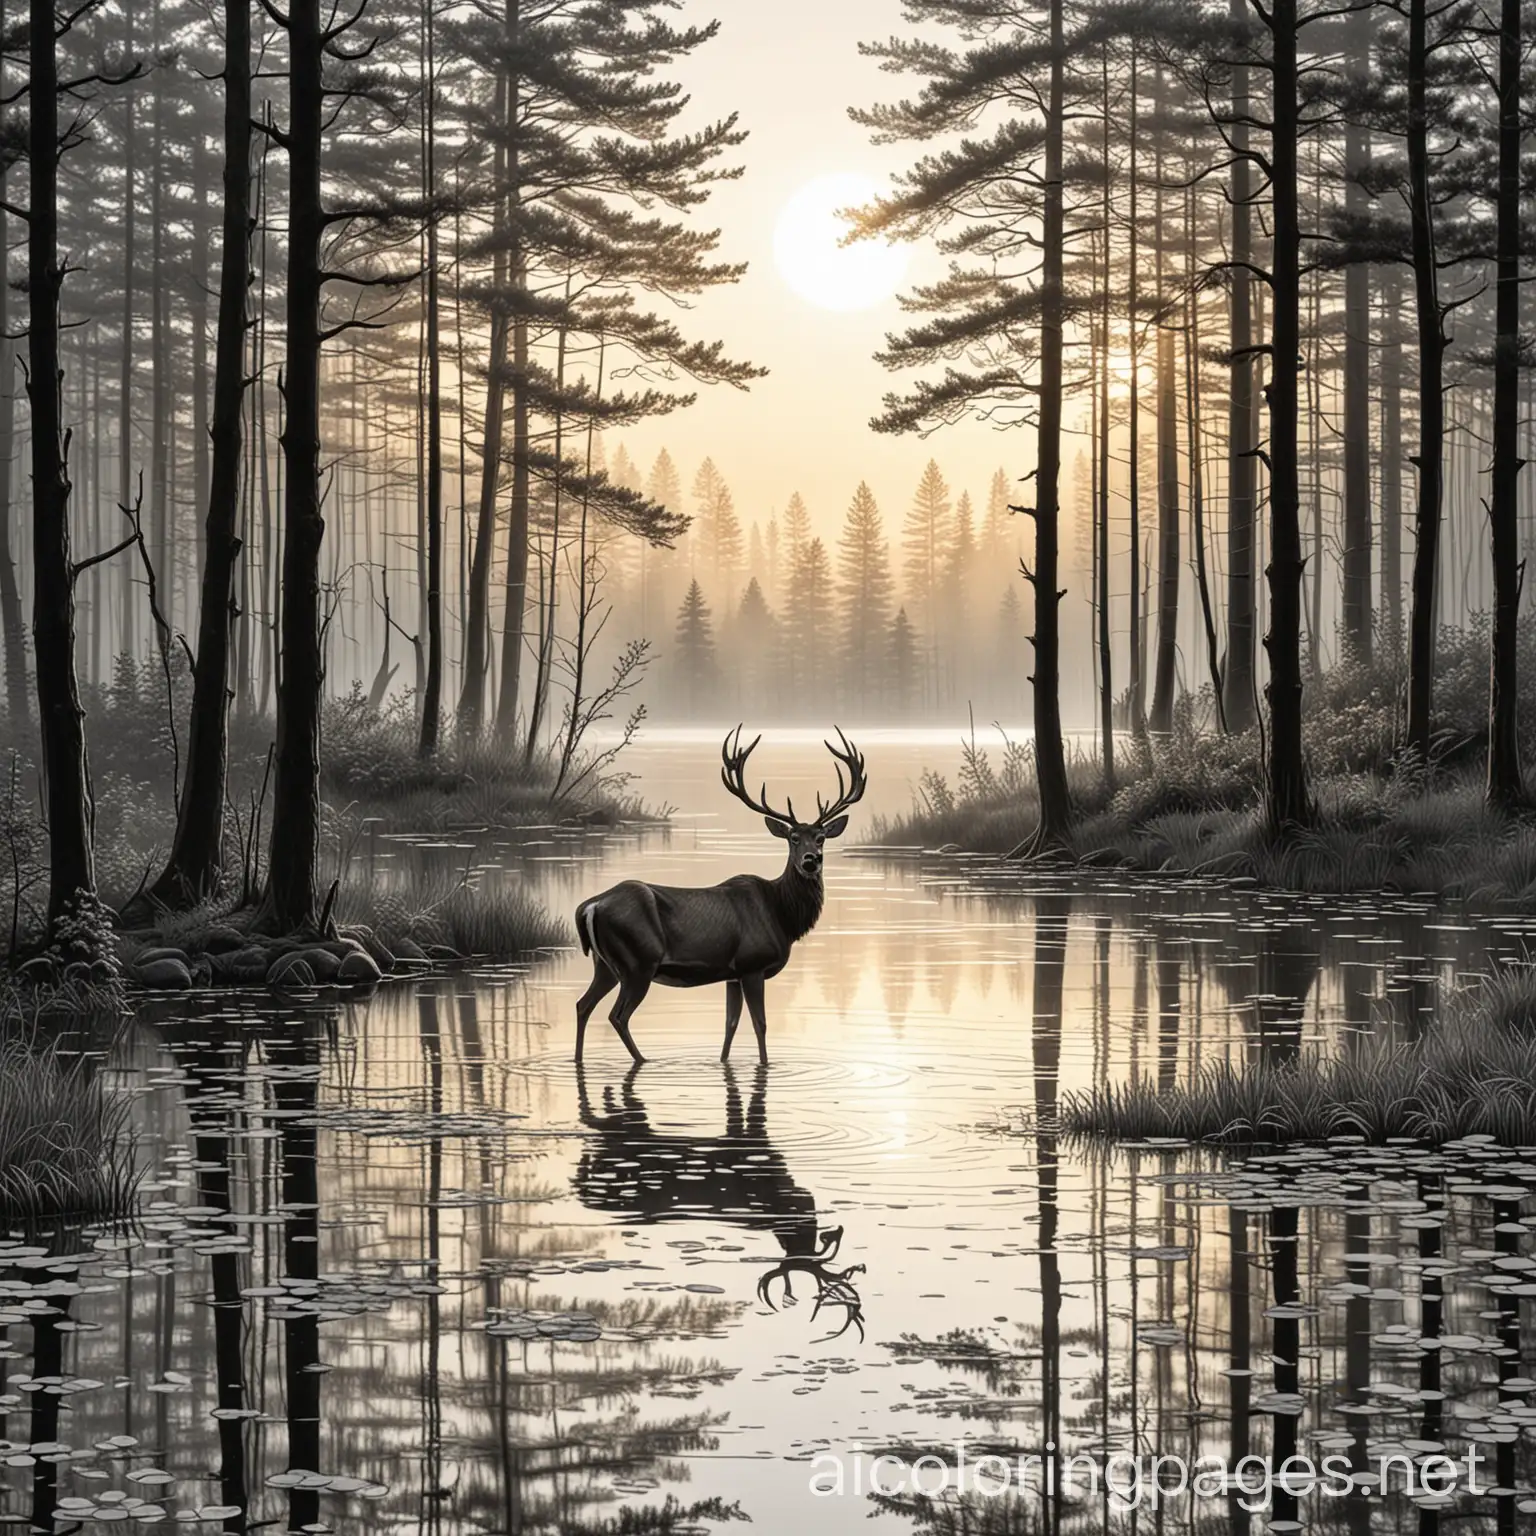 A silhouette of a majestic deer standing amidst gentle ripples in a tranquil forest pond, under the radiant glow of a setting or rising sun that casts an ethereal light through dense coniferous trees; evoking feelings of serenity and awe., illustration, painting, cinematic
______, Coloring Page, black and white, line art, white background, Simplicity, Ample White Space. The background of the coloring page is plain white to make it easy for young children to color within the lines. The outlines of all the subjects are easy to distinguish, making it simple for kids to color without too much difficulty